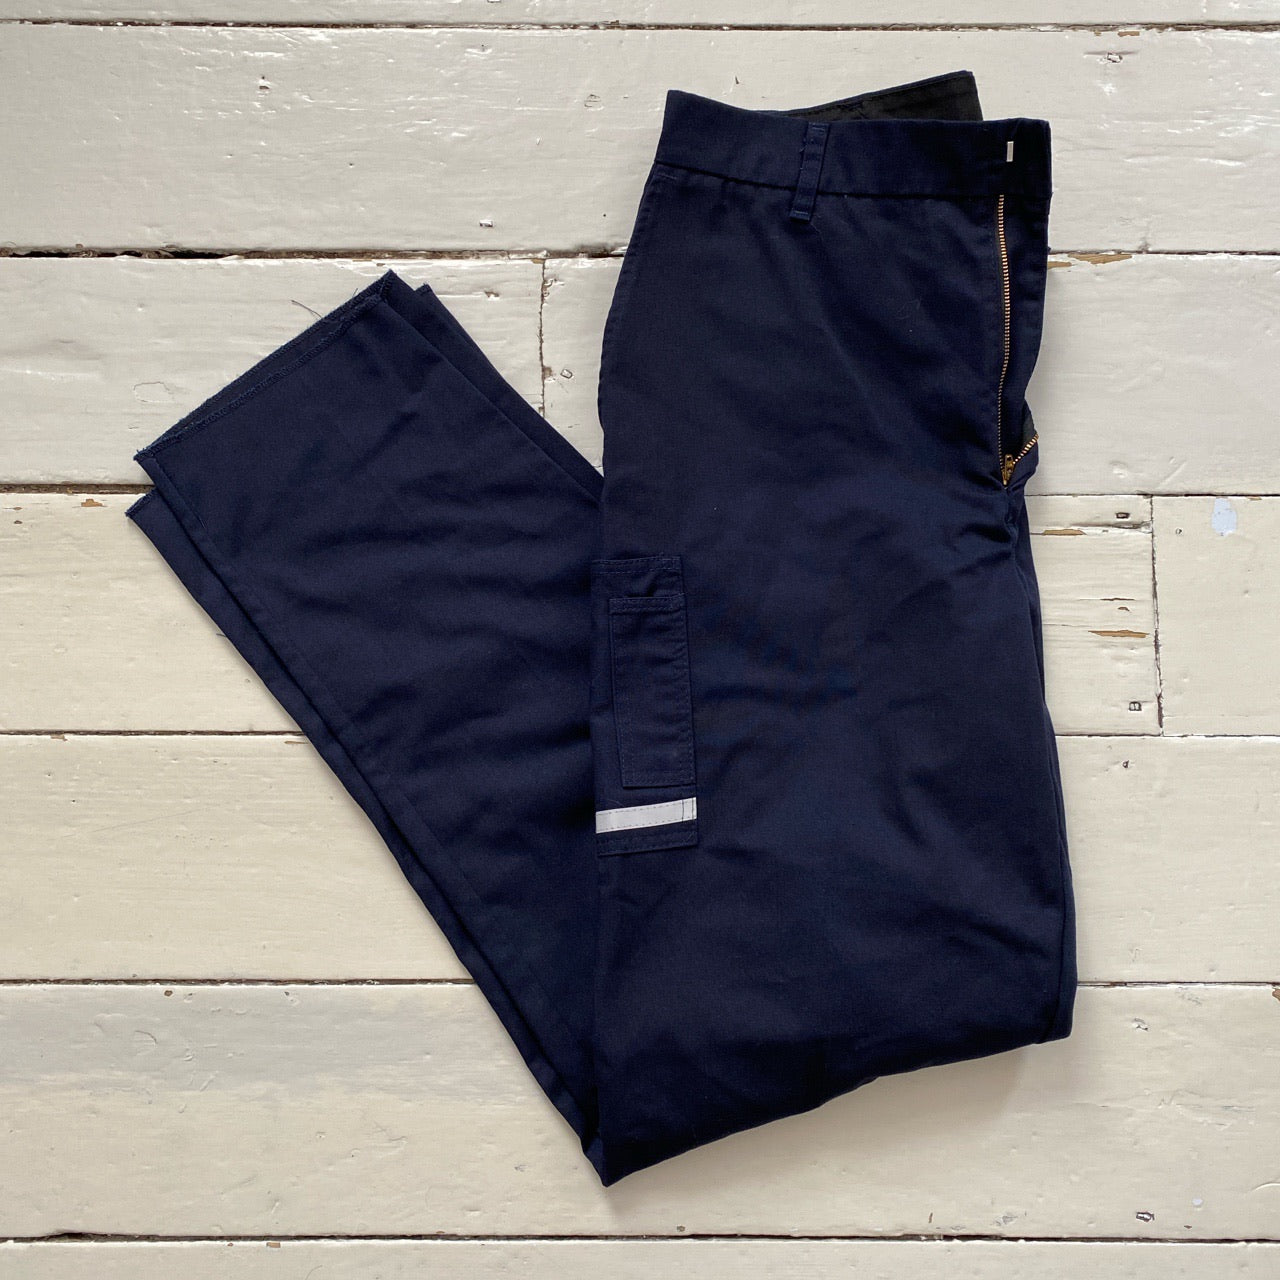 Fedex Cargo Style Trousers (38/35)